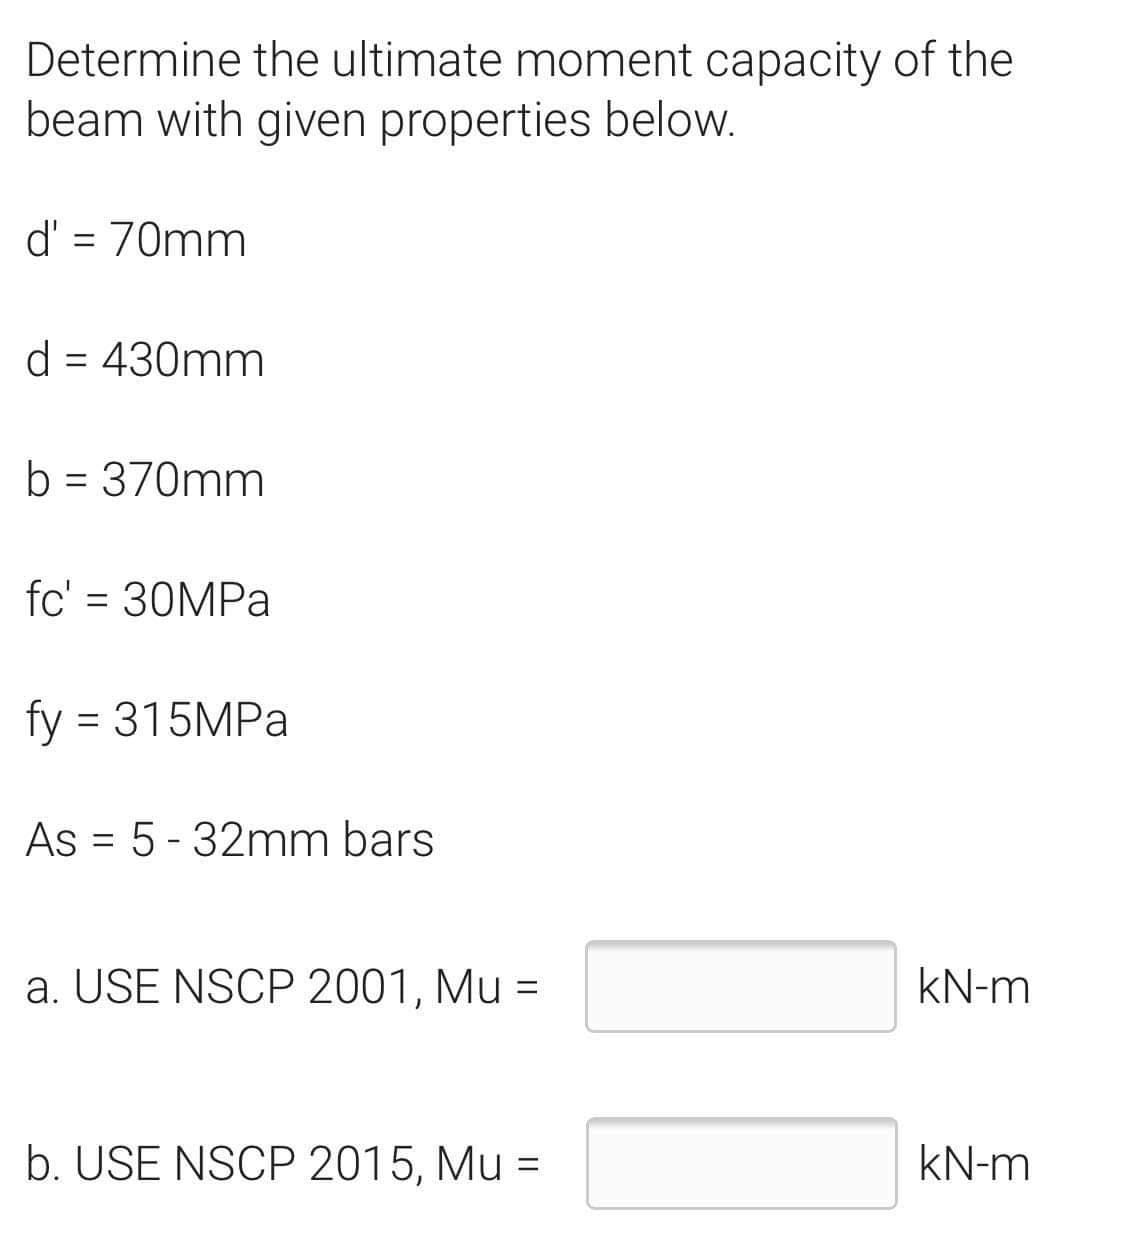 Determine the ultimate moment capacity of the
beam with given properties below.
d' = 70mm
d = 430mm
b = 370mm
fc' = 30MPa
fy = 315MPa
As = 5-32mm bars
a. USE NSCP 2001, Mu =
kN-m
b. USE NSCP 2015, Mu =
kN-m